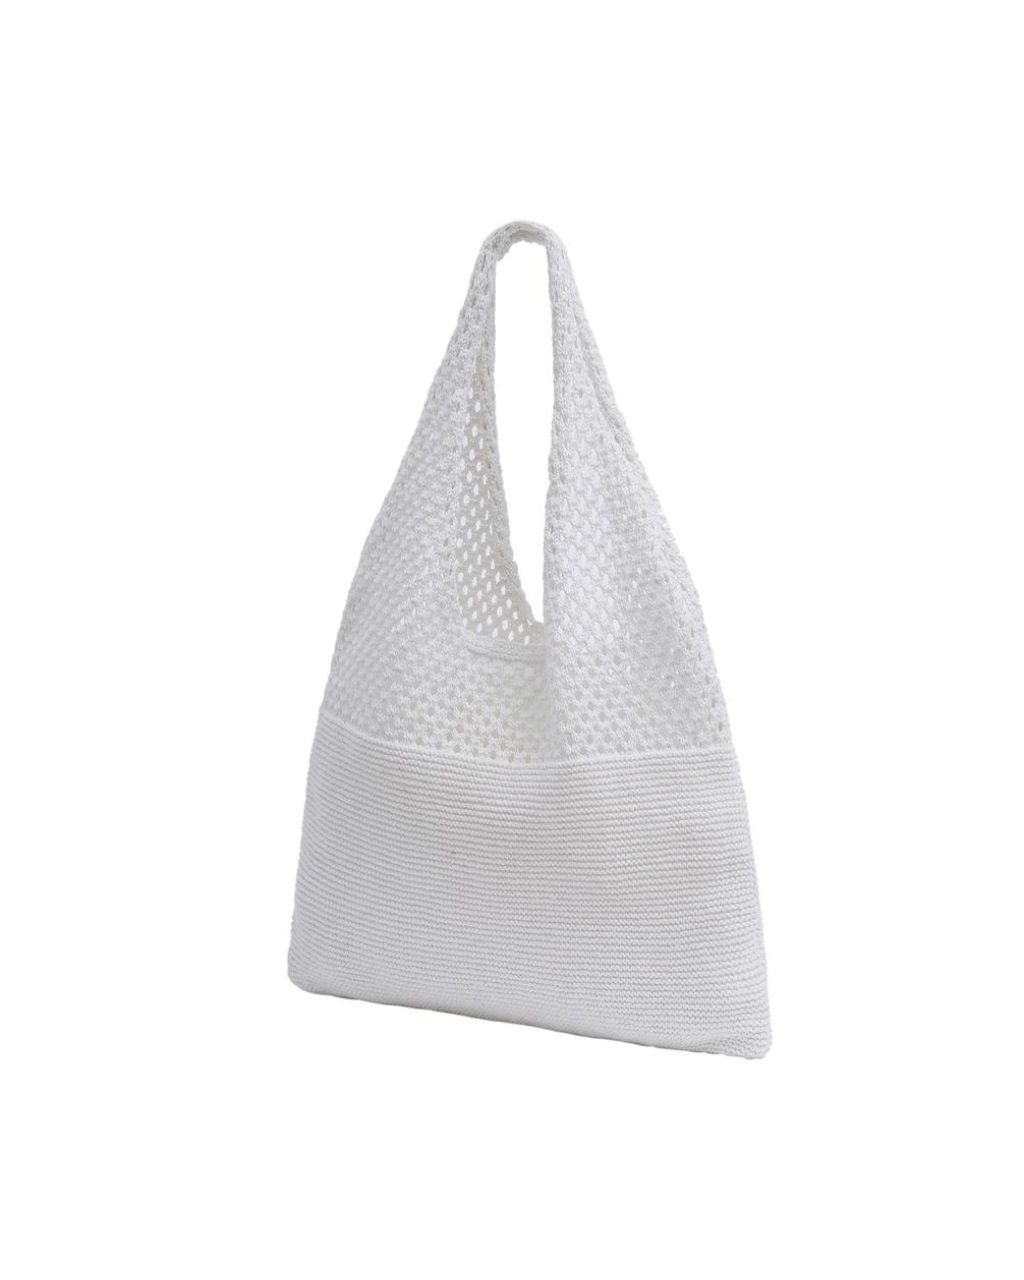 White Mesh Catchall Bag, Daytime Bag by Selini | LIT Boutique